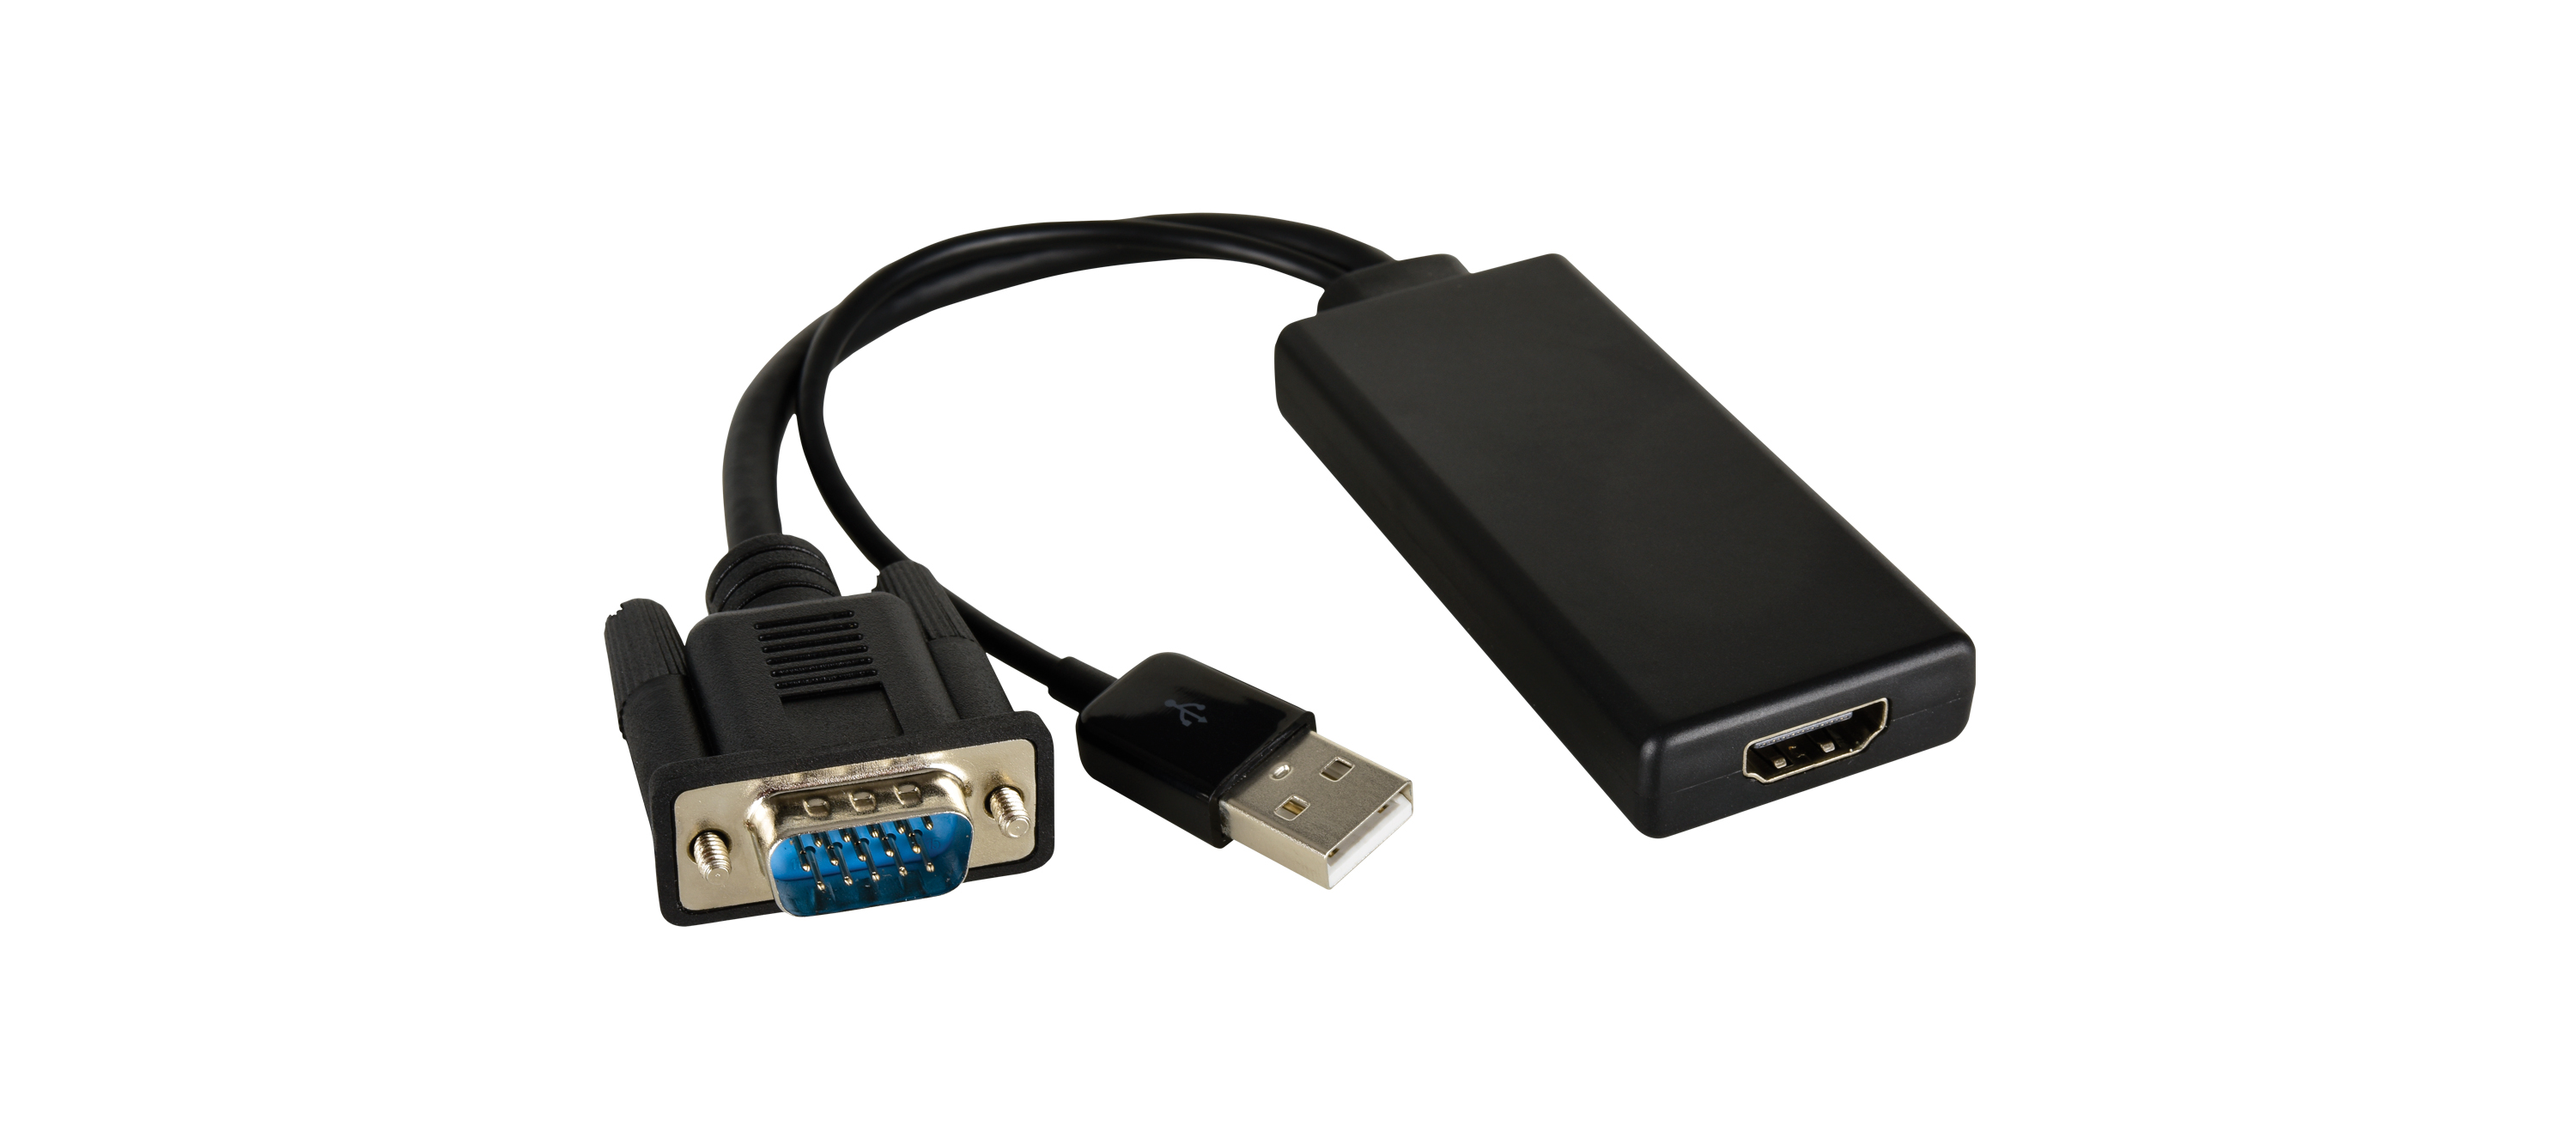 ADC-GM/HF 15–pin HD (M) to HDMI (F) with USB Audio/Power Adapter Cable